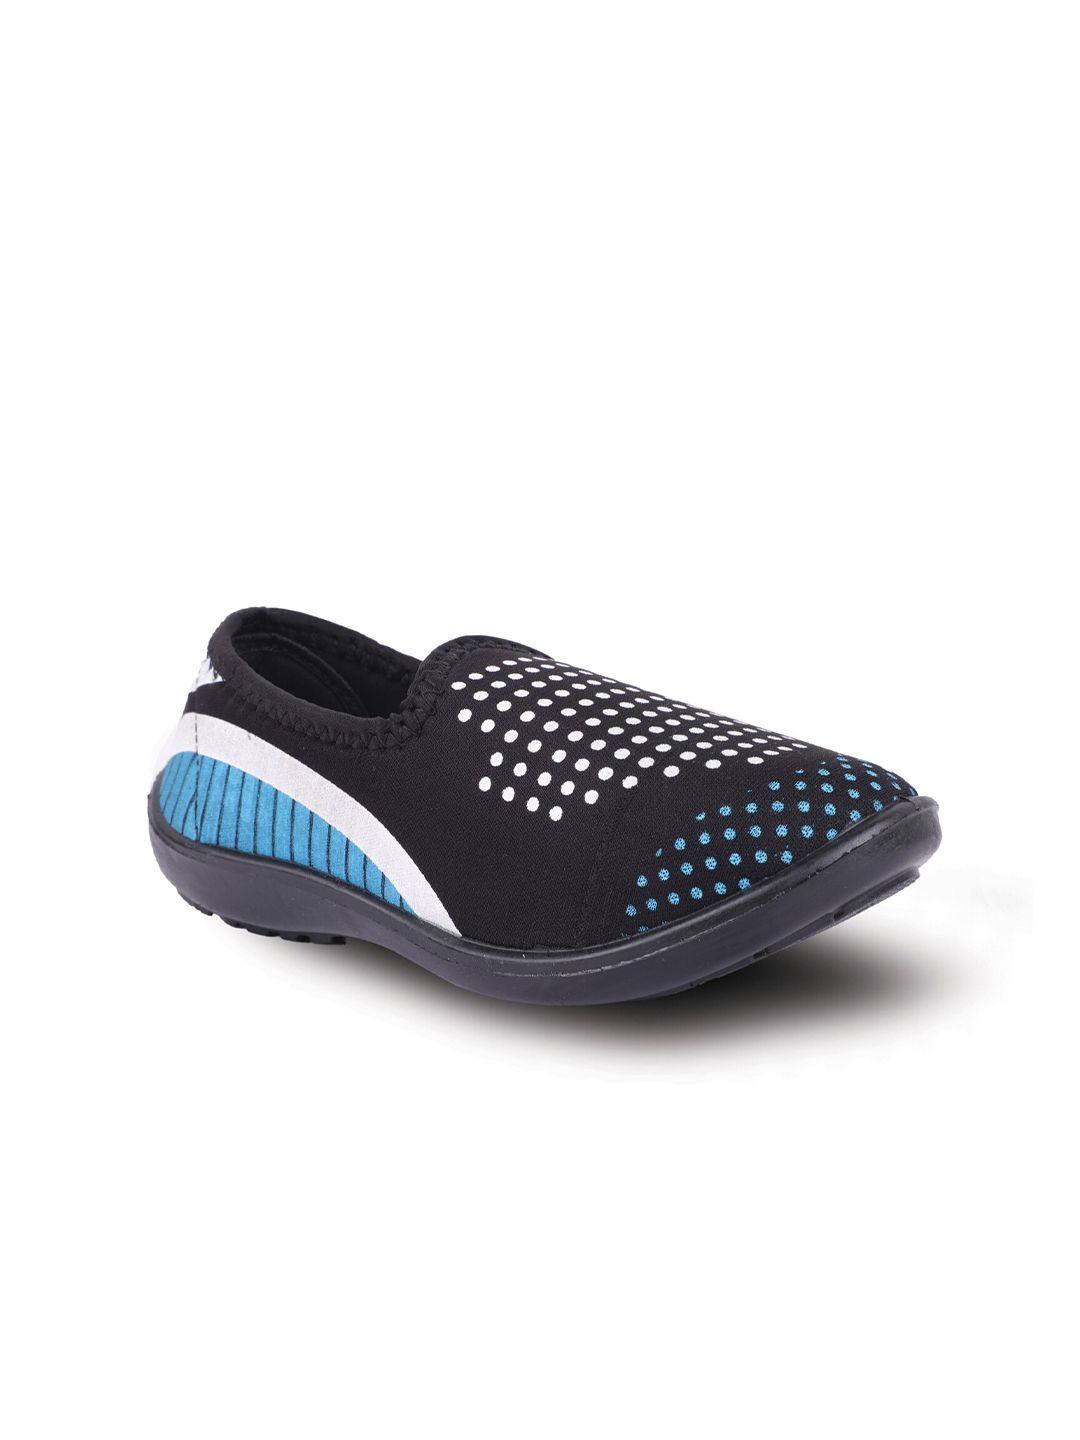 FABBMATE Women Black Walking Non-Marking Shoes Price in India